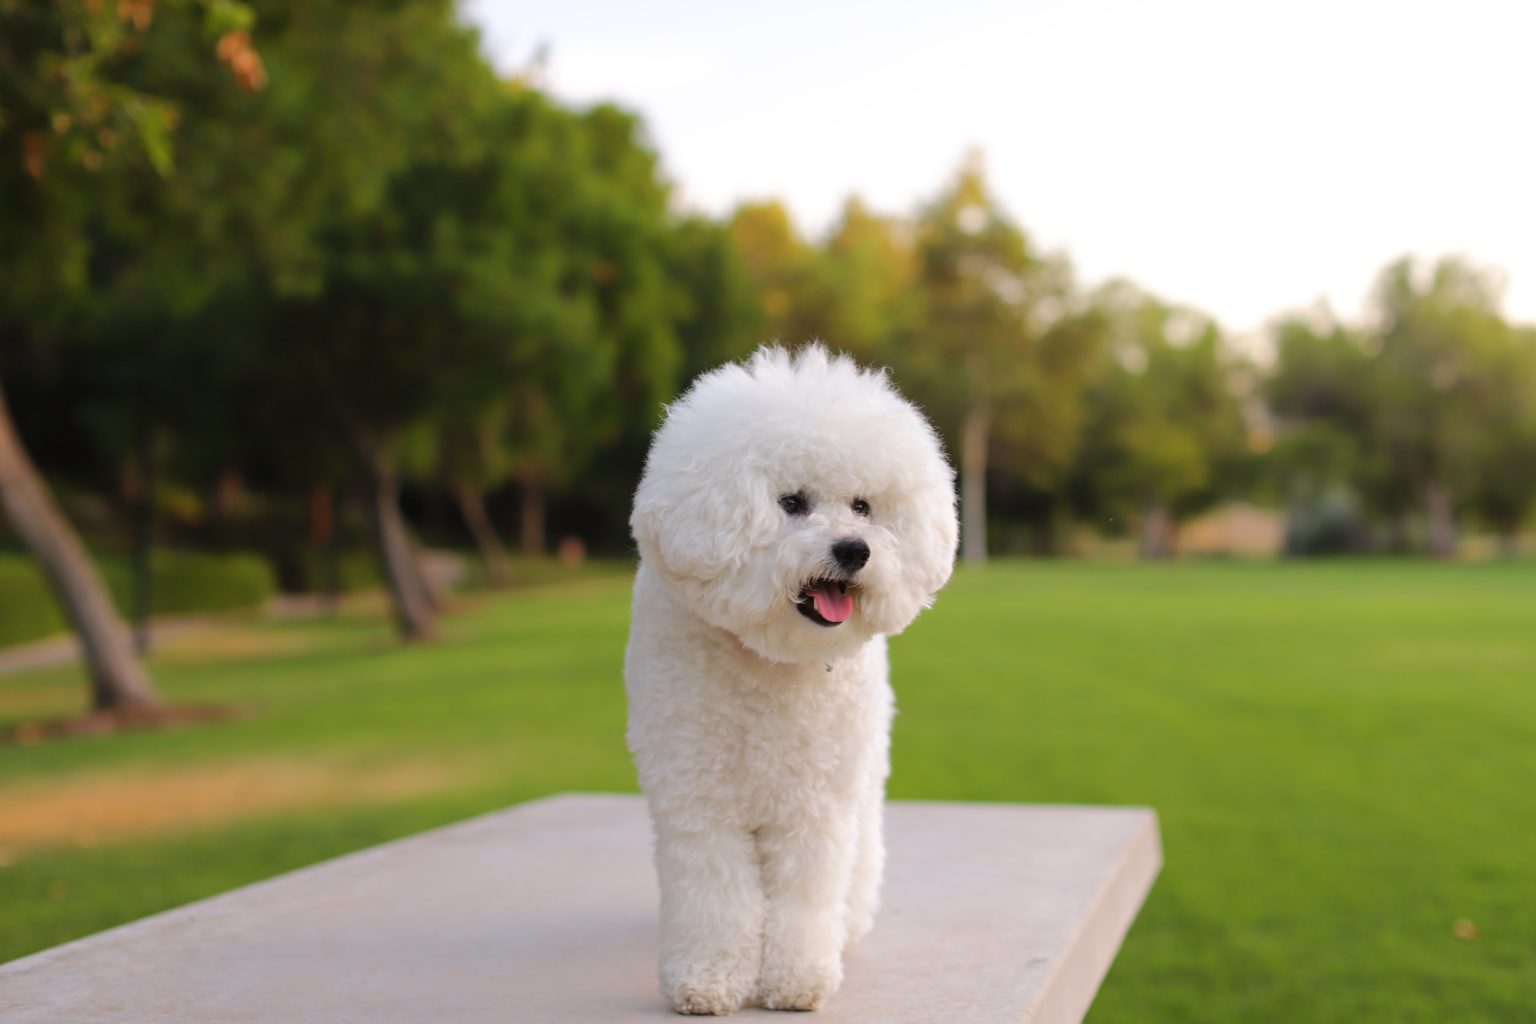 The bichon frise (pronounced bee-SHON free-ZAY) is thought to be a descendant of the water spaniel and was known in the Mediterranean area as far back as the Middle Ages.